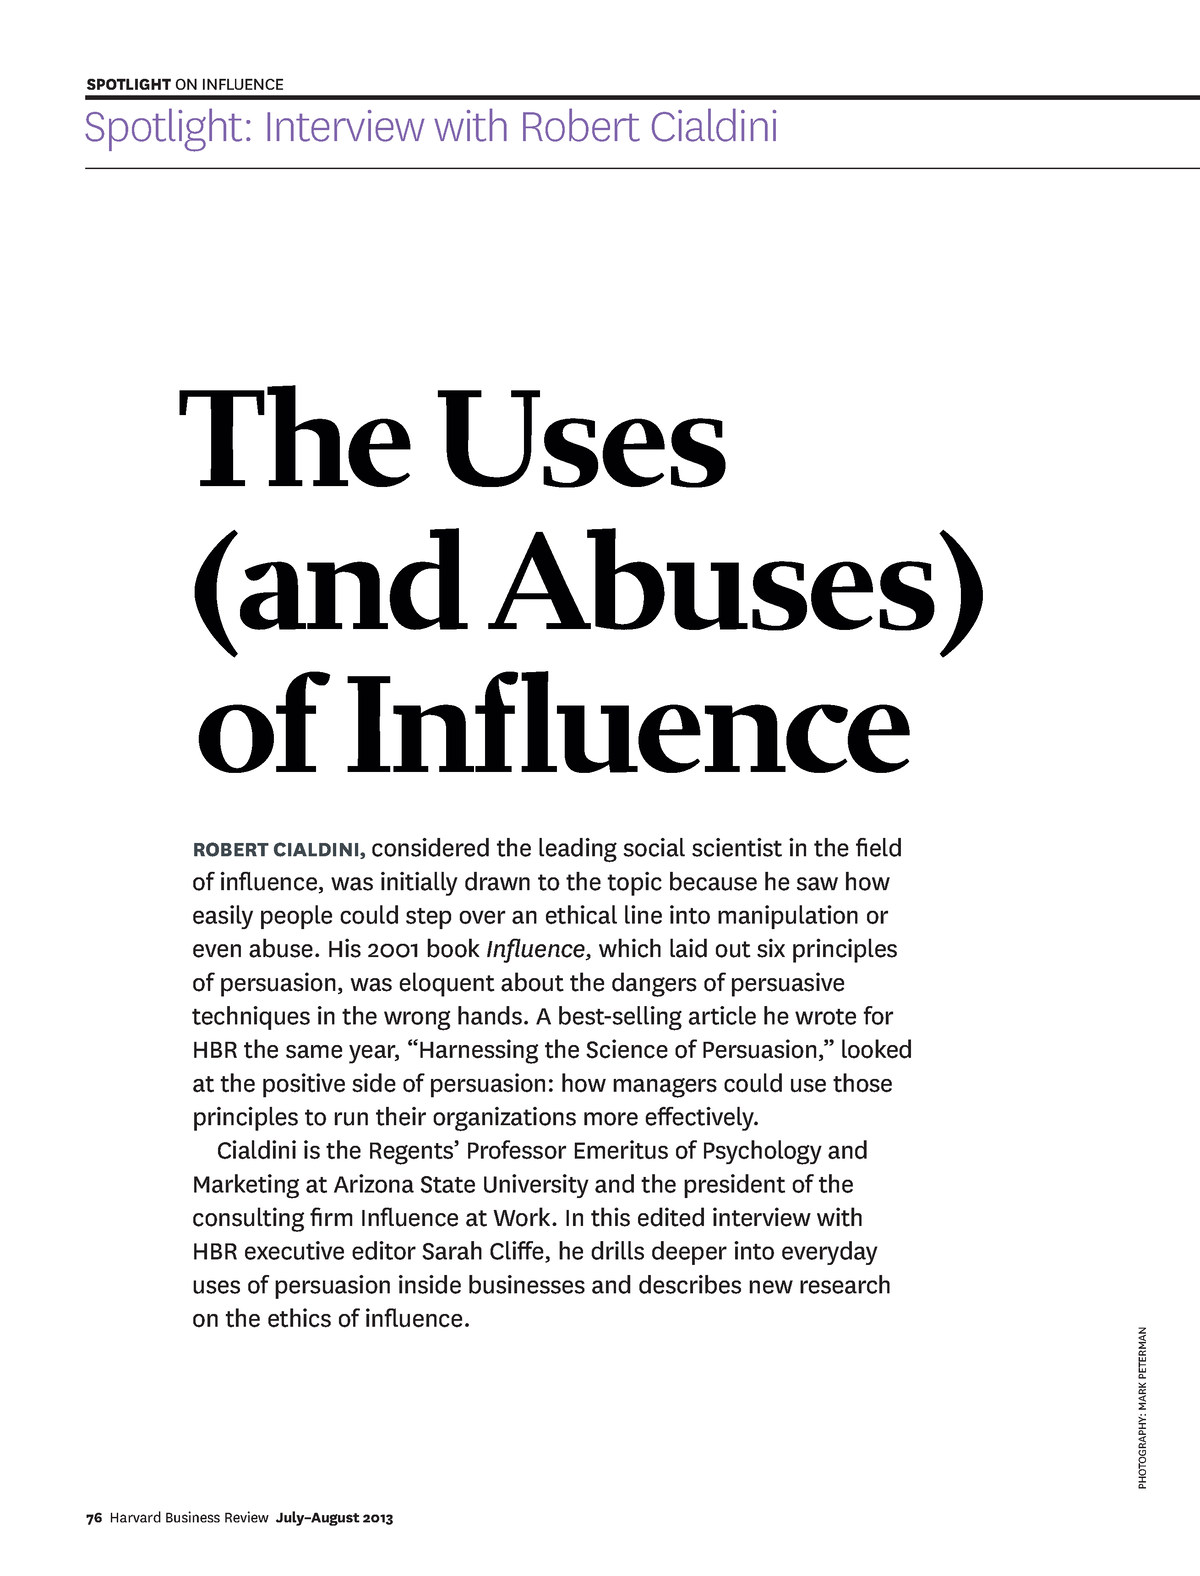 The Uses (and Abuses) of Influence